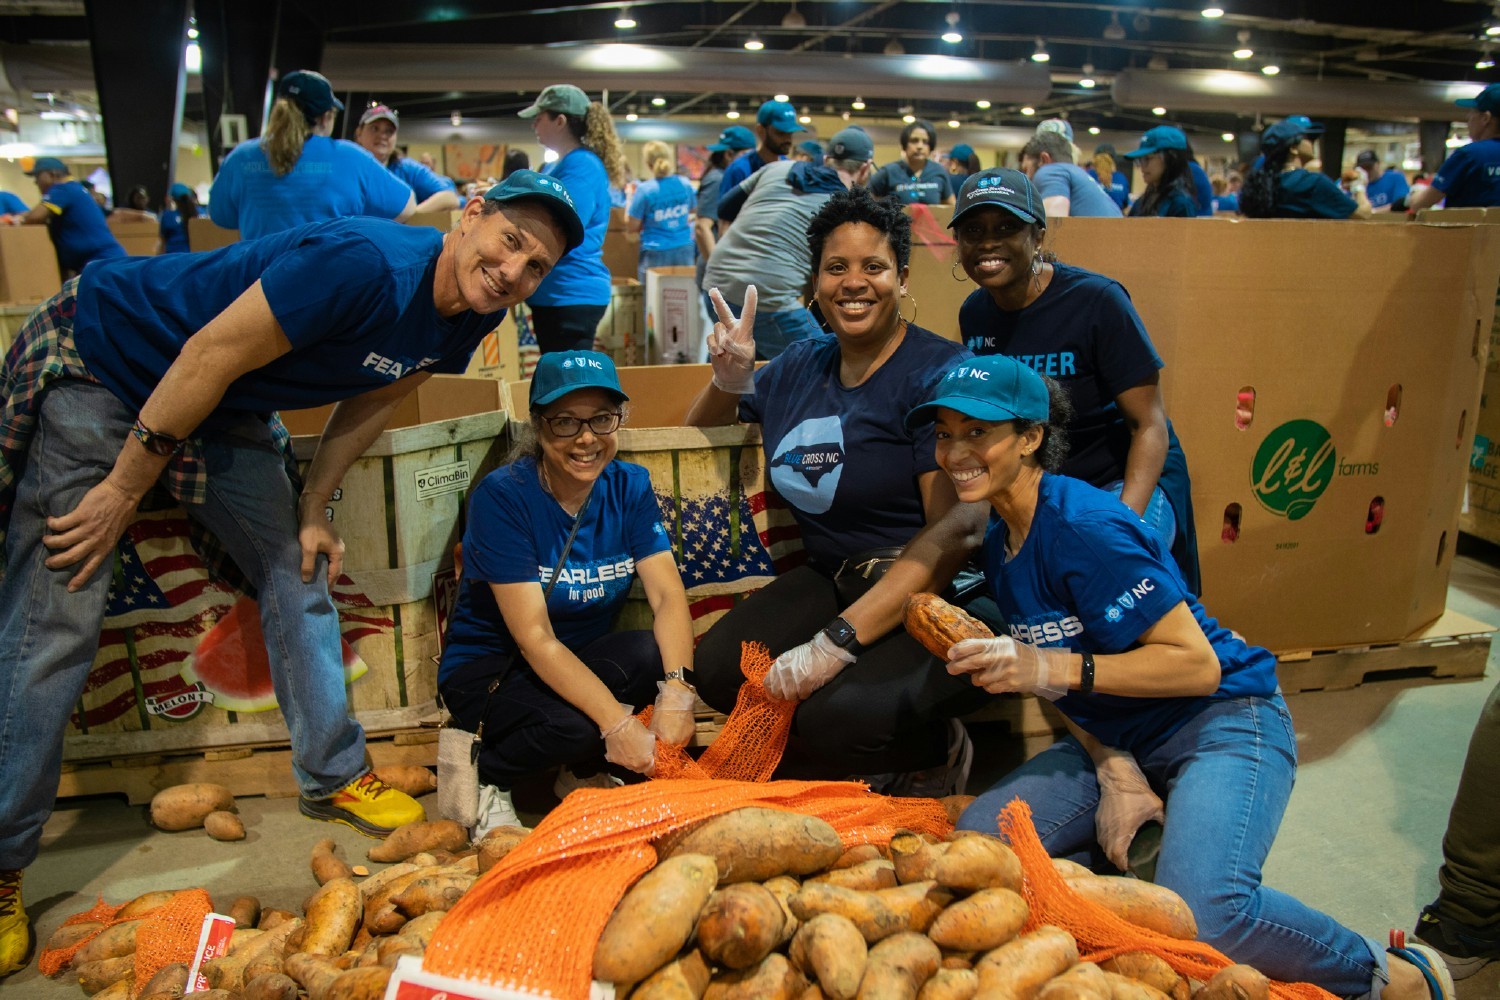 Team work, makes the dreams (about sweet potatoes) work. Supporting our local food bank.